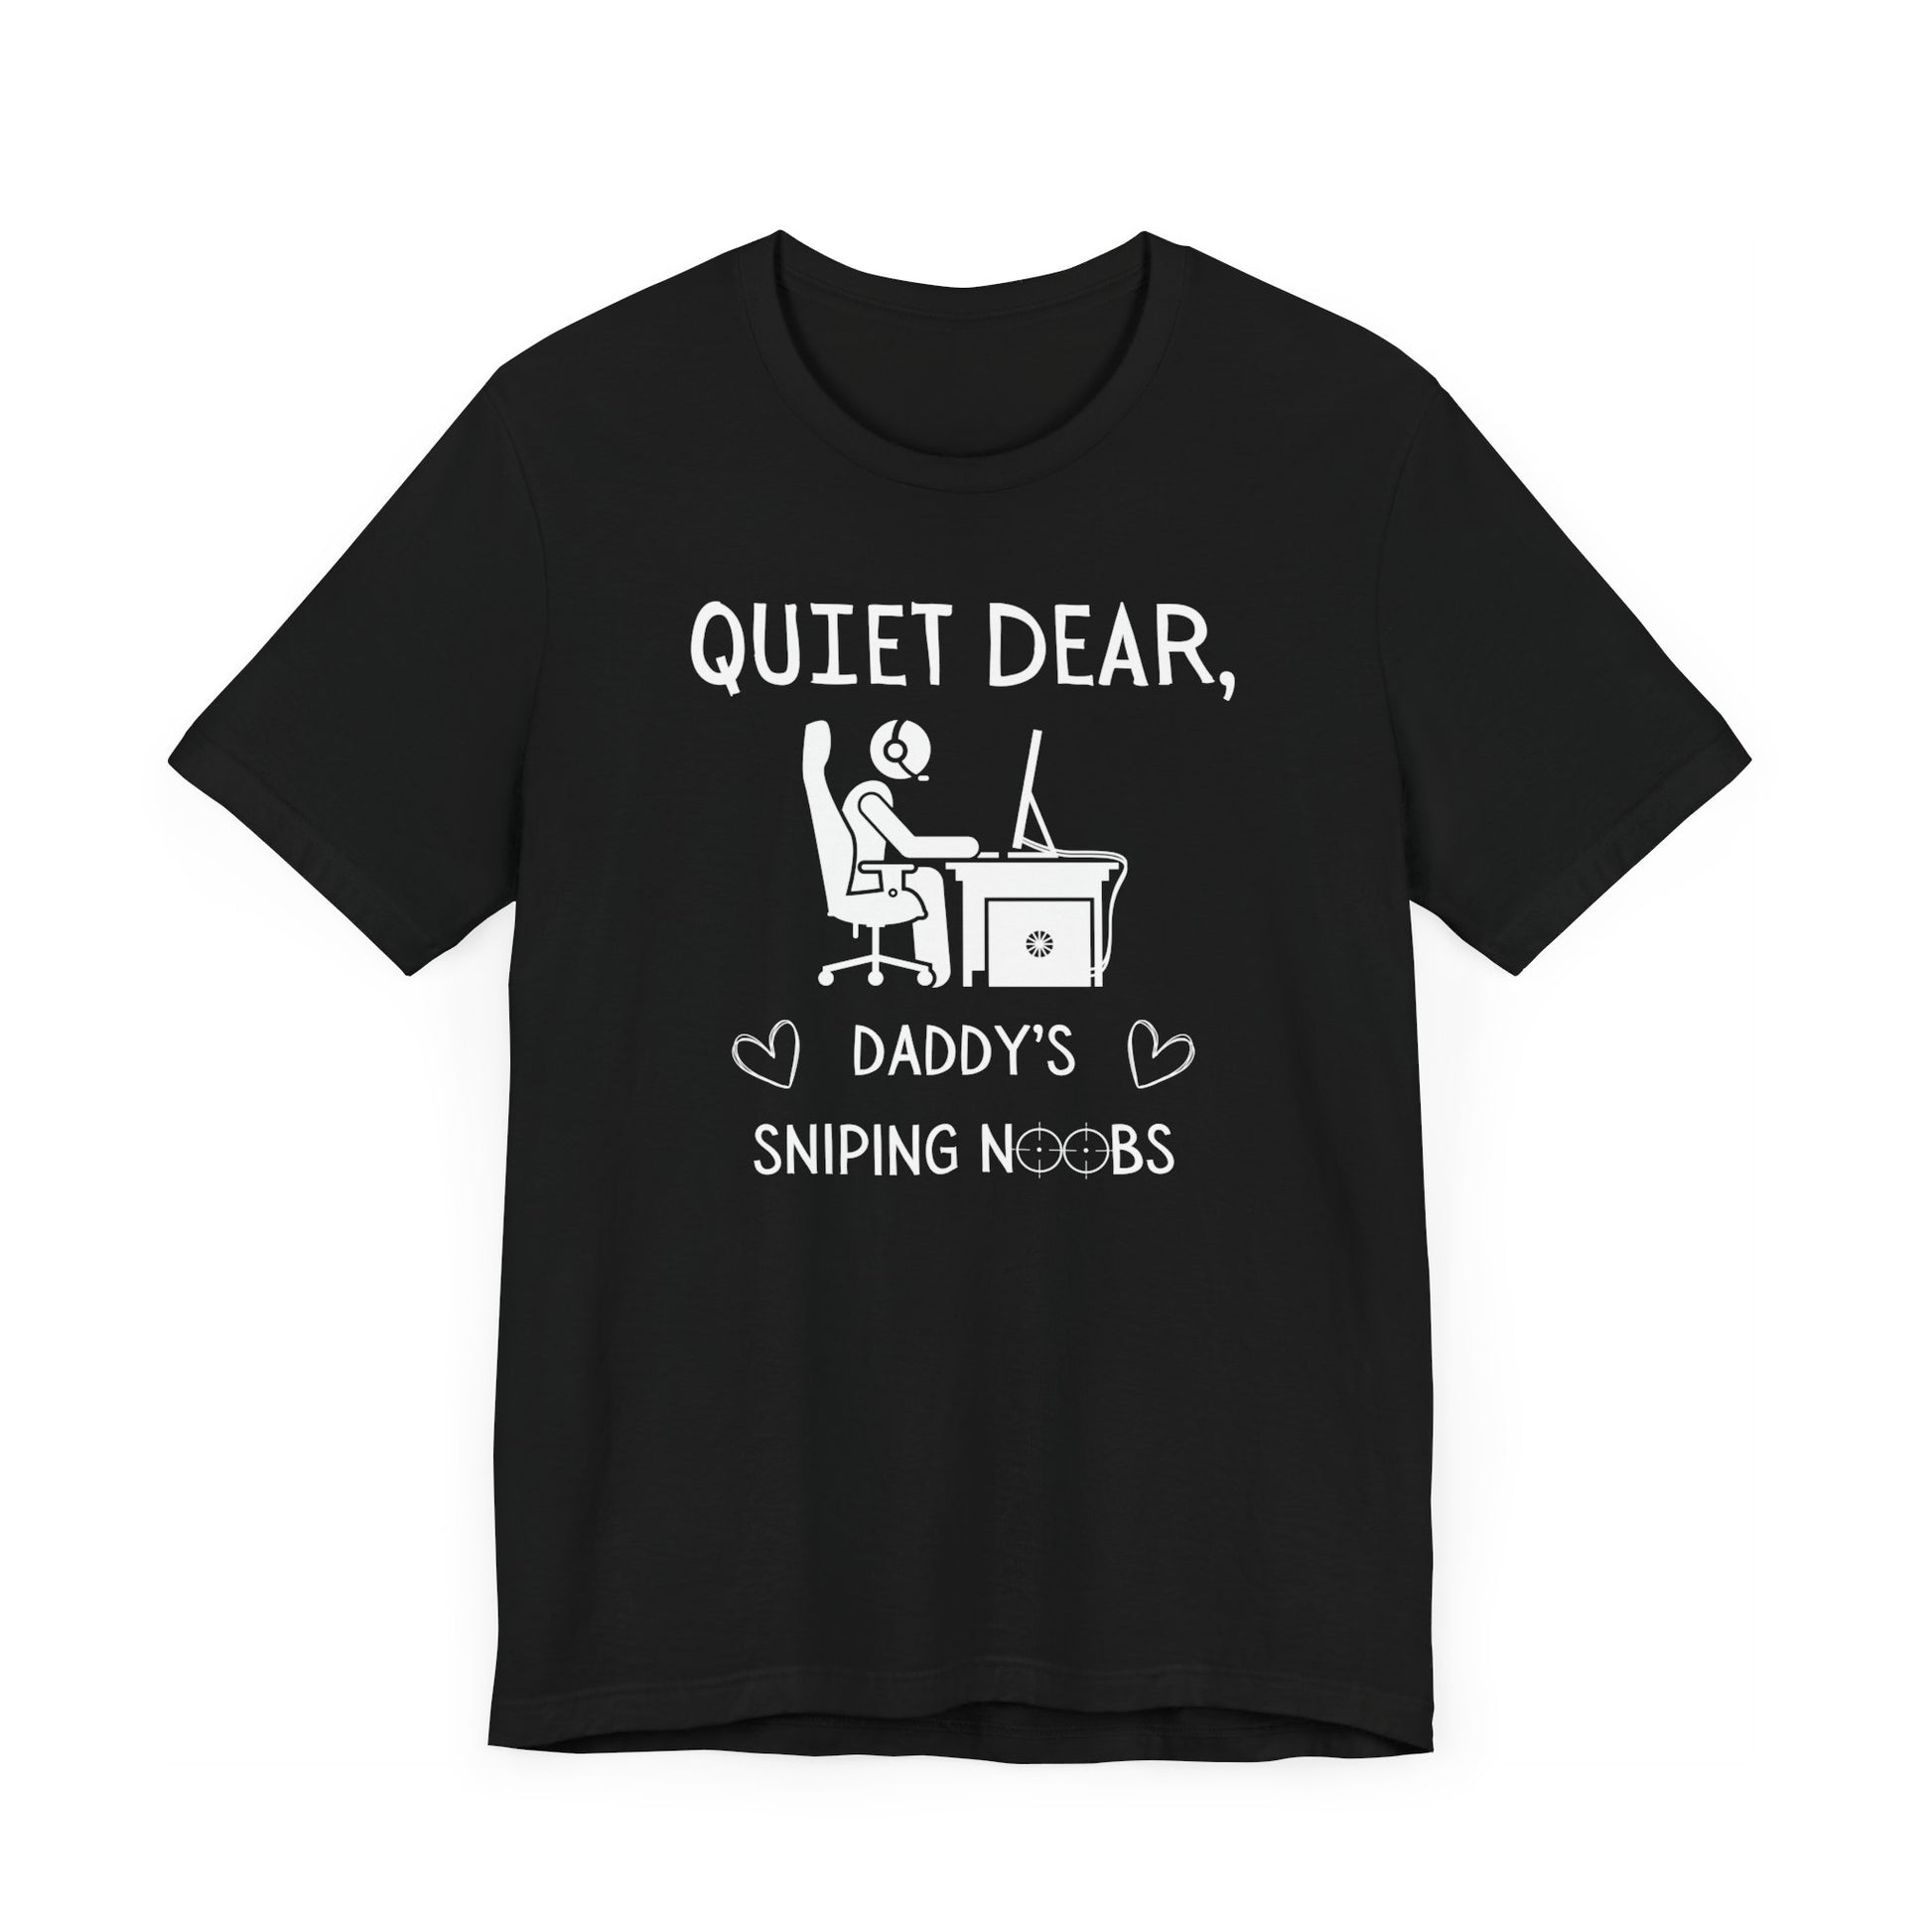 A flat image of a black t-shirt that reads Quiet Dear, Daddy's Sniping Noobs in white text. The lower text is framed by two hearts, and the O's are in the shape of sniper scopes. In the center of the shirt is an image of a person at a desk with a gaming PC.